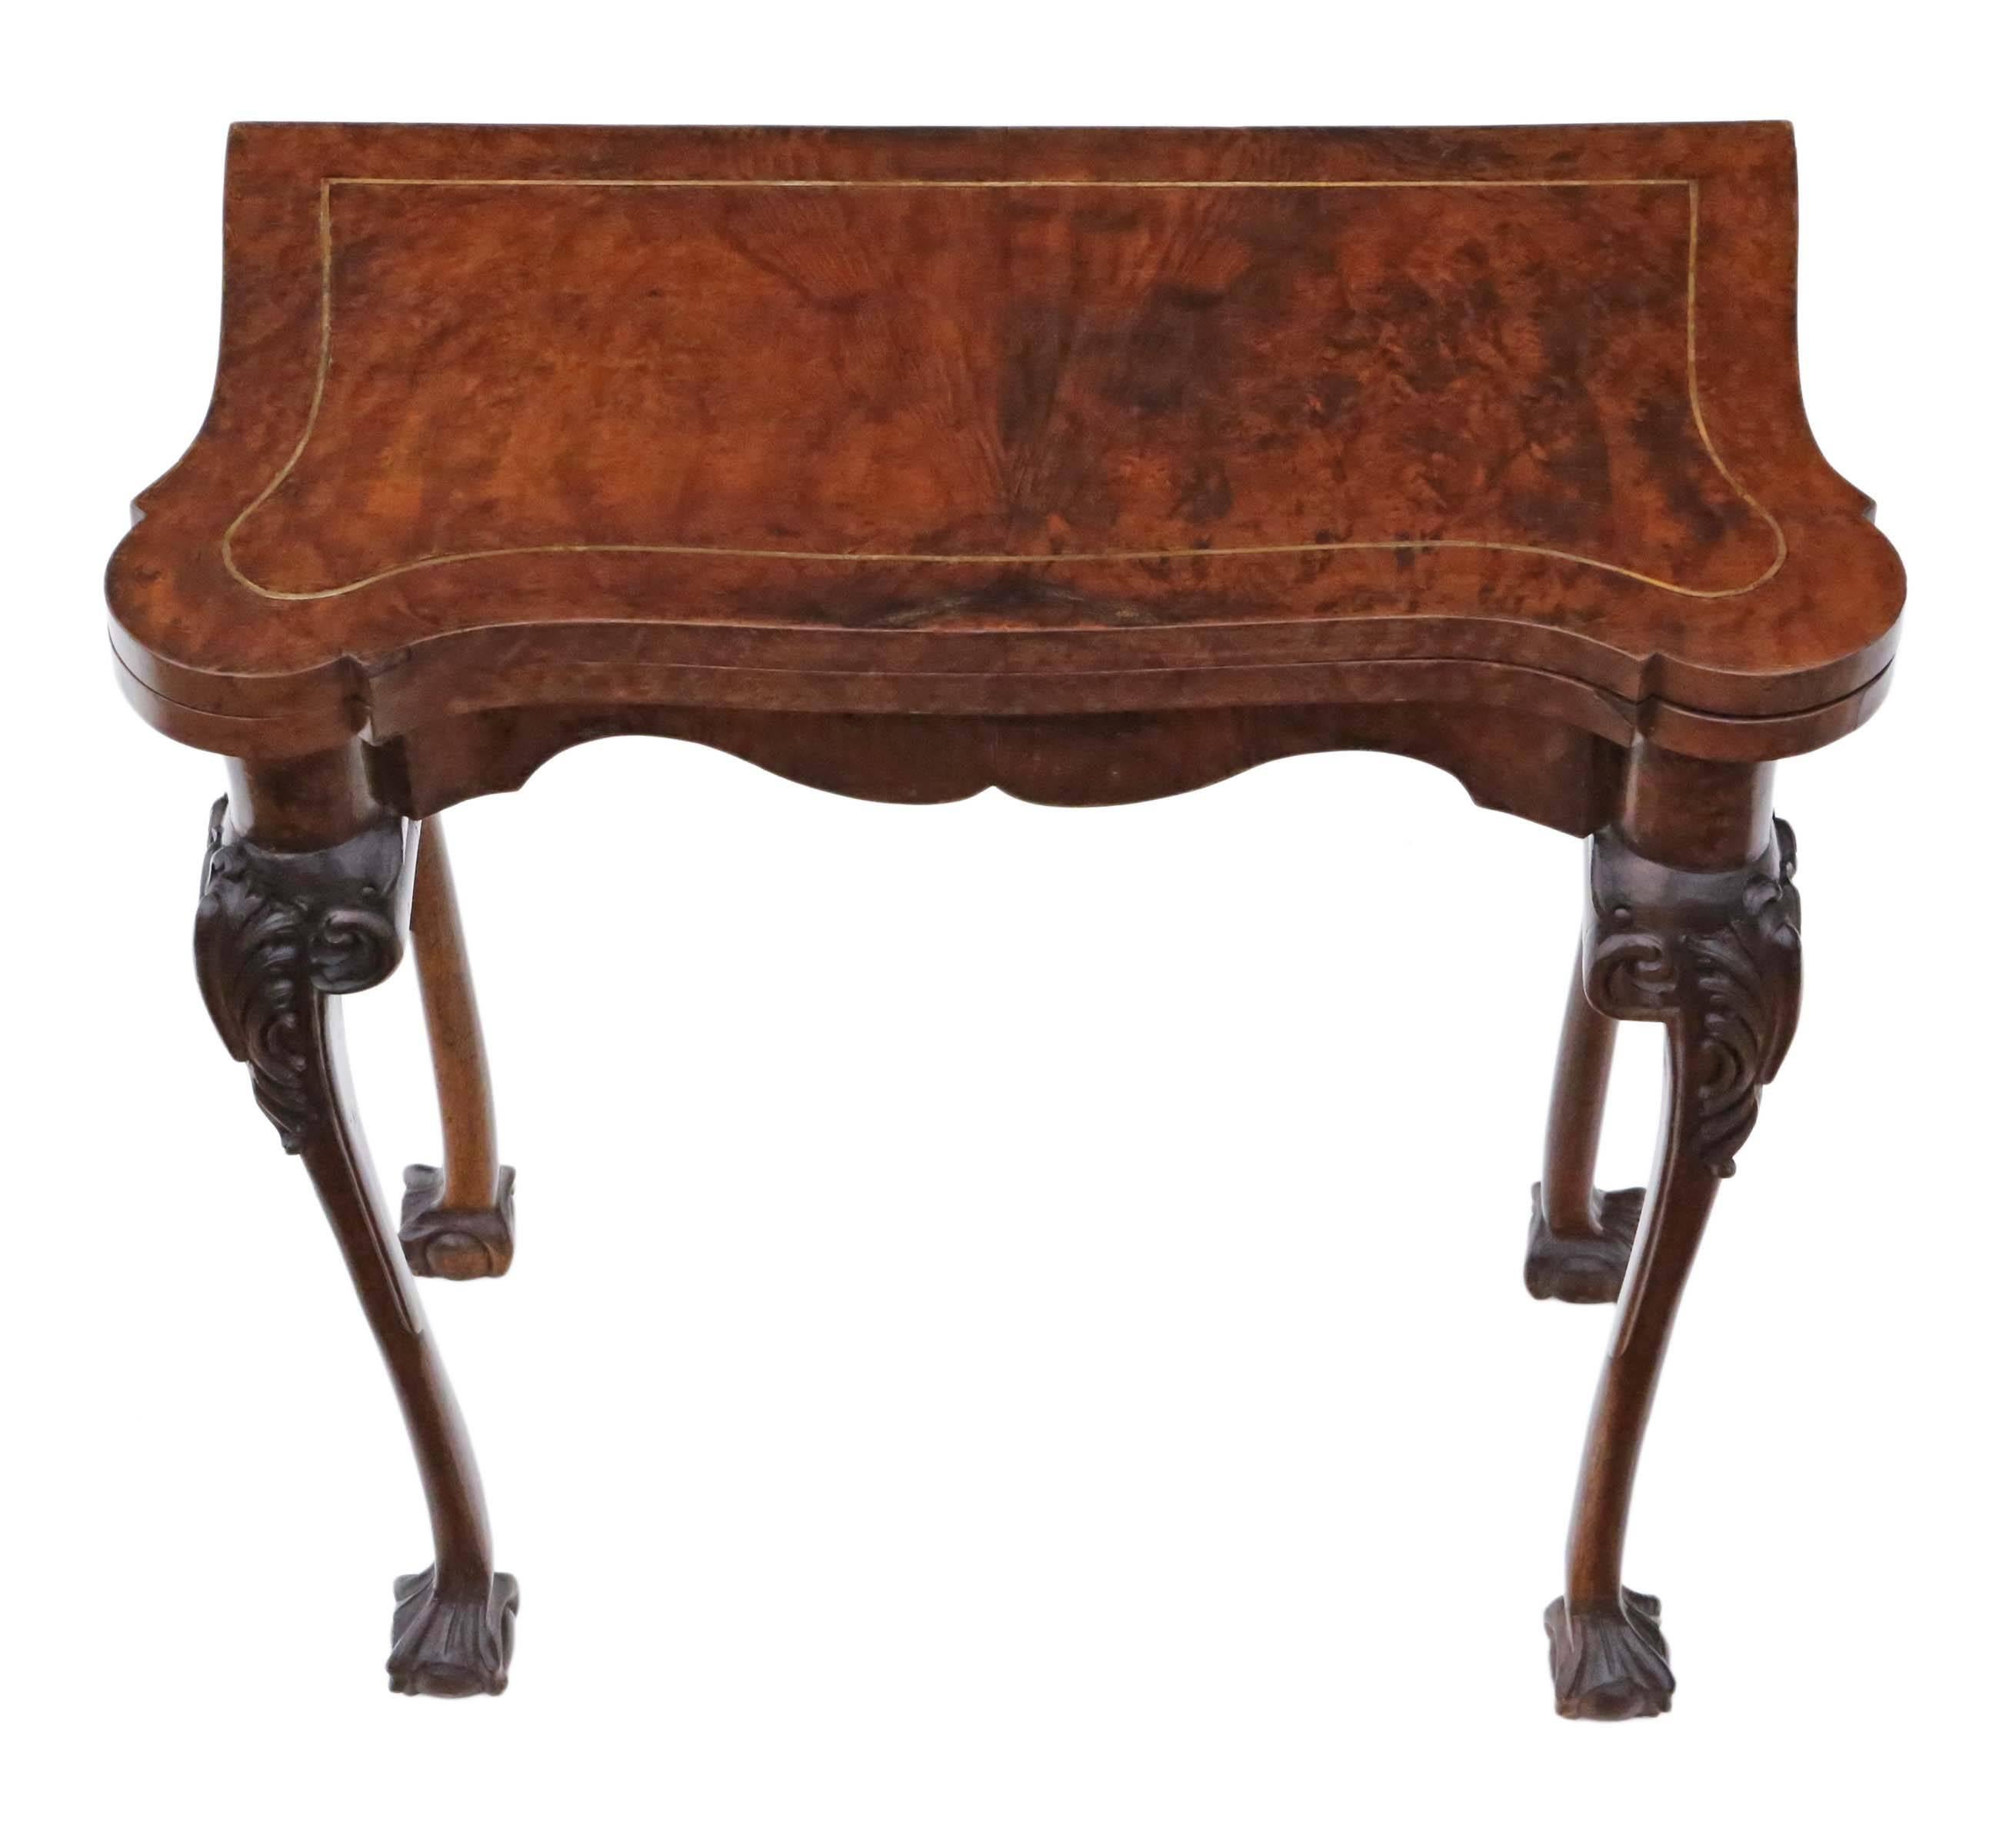 Antique Georgian revival circa 1920 burr walnut folding card or tea table. The baise is old, but has only minor wear and no major marks.

Solid and strong, with no loose joints. Full of age, character and charm. Attractive carved cabriole legs